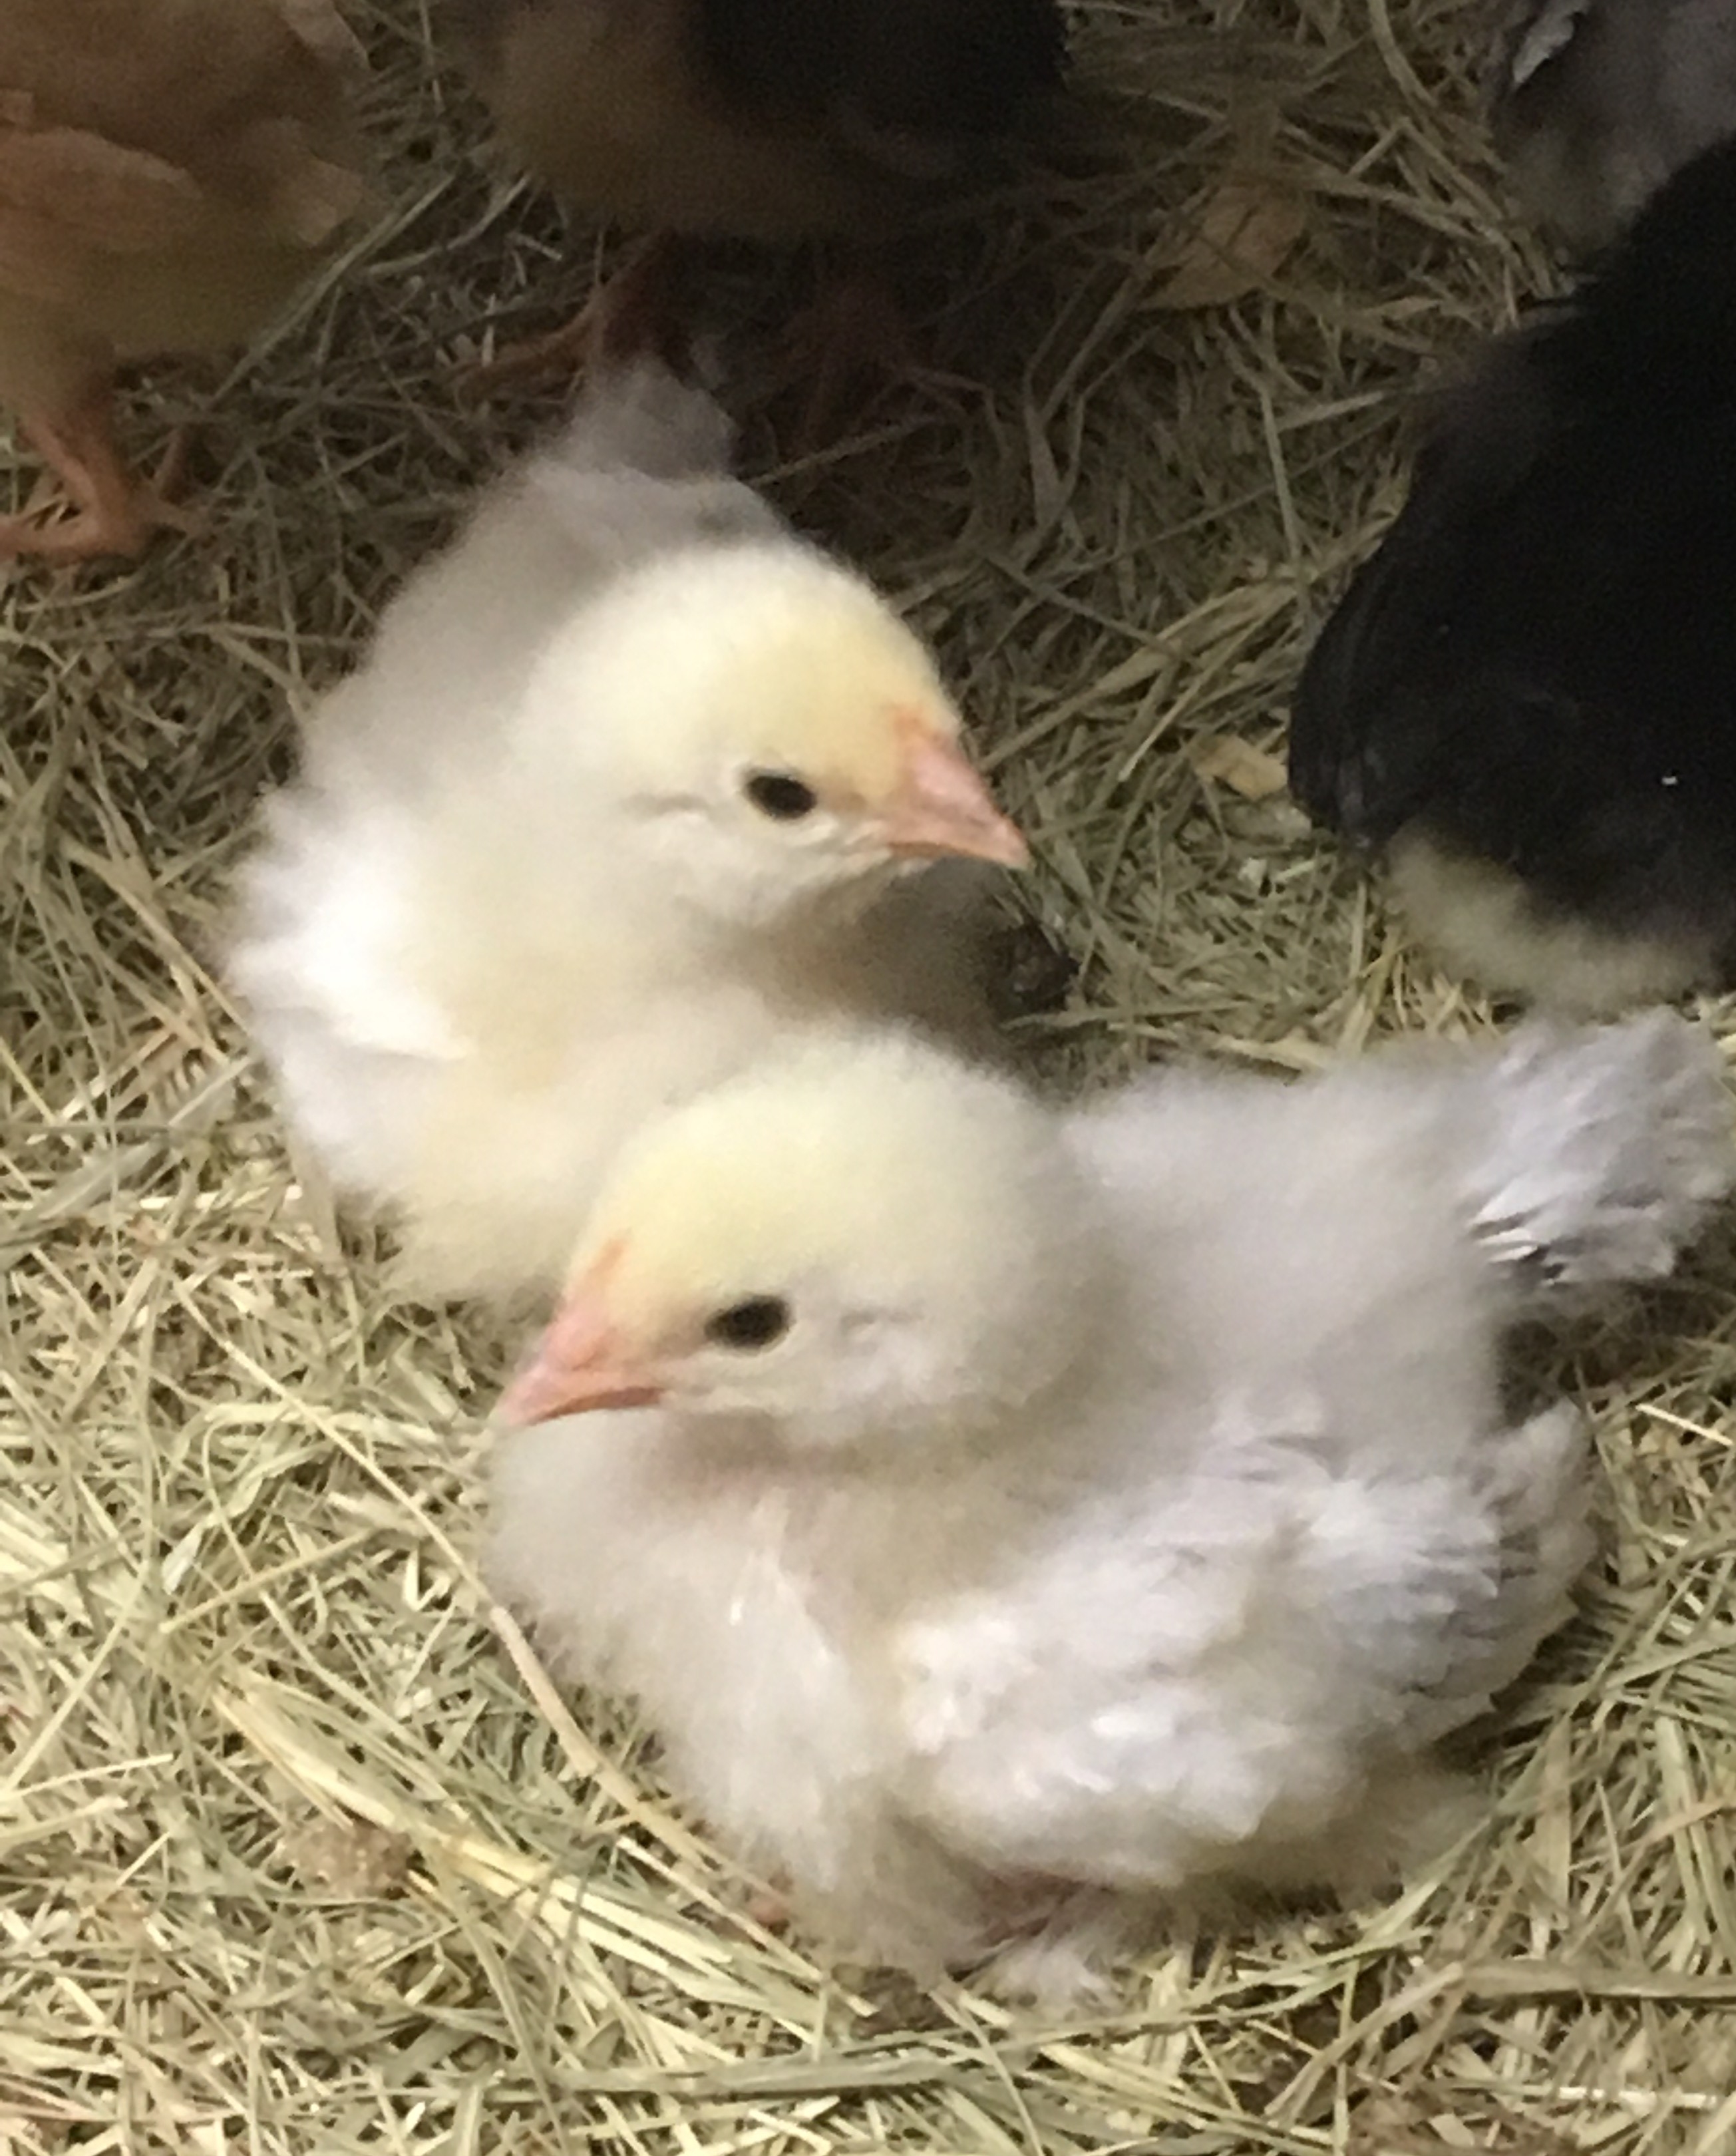 Video of Our Chicken Powered Lawn Mower & Spring Chicks!